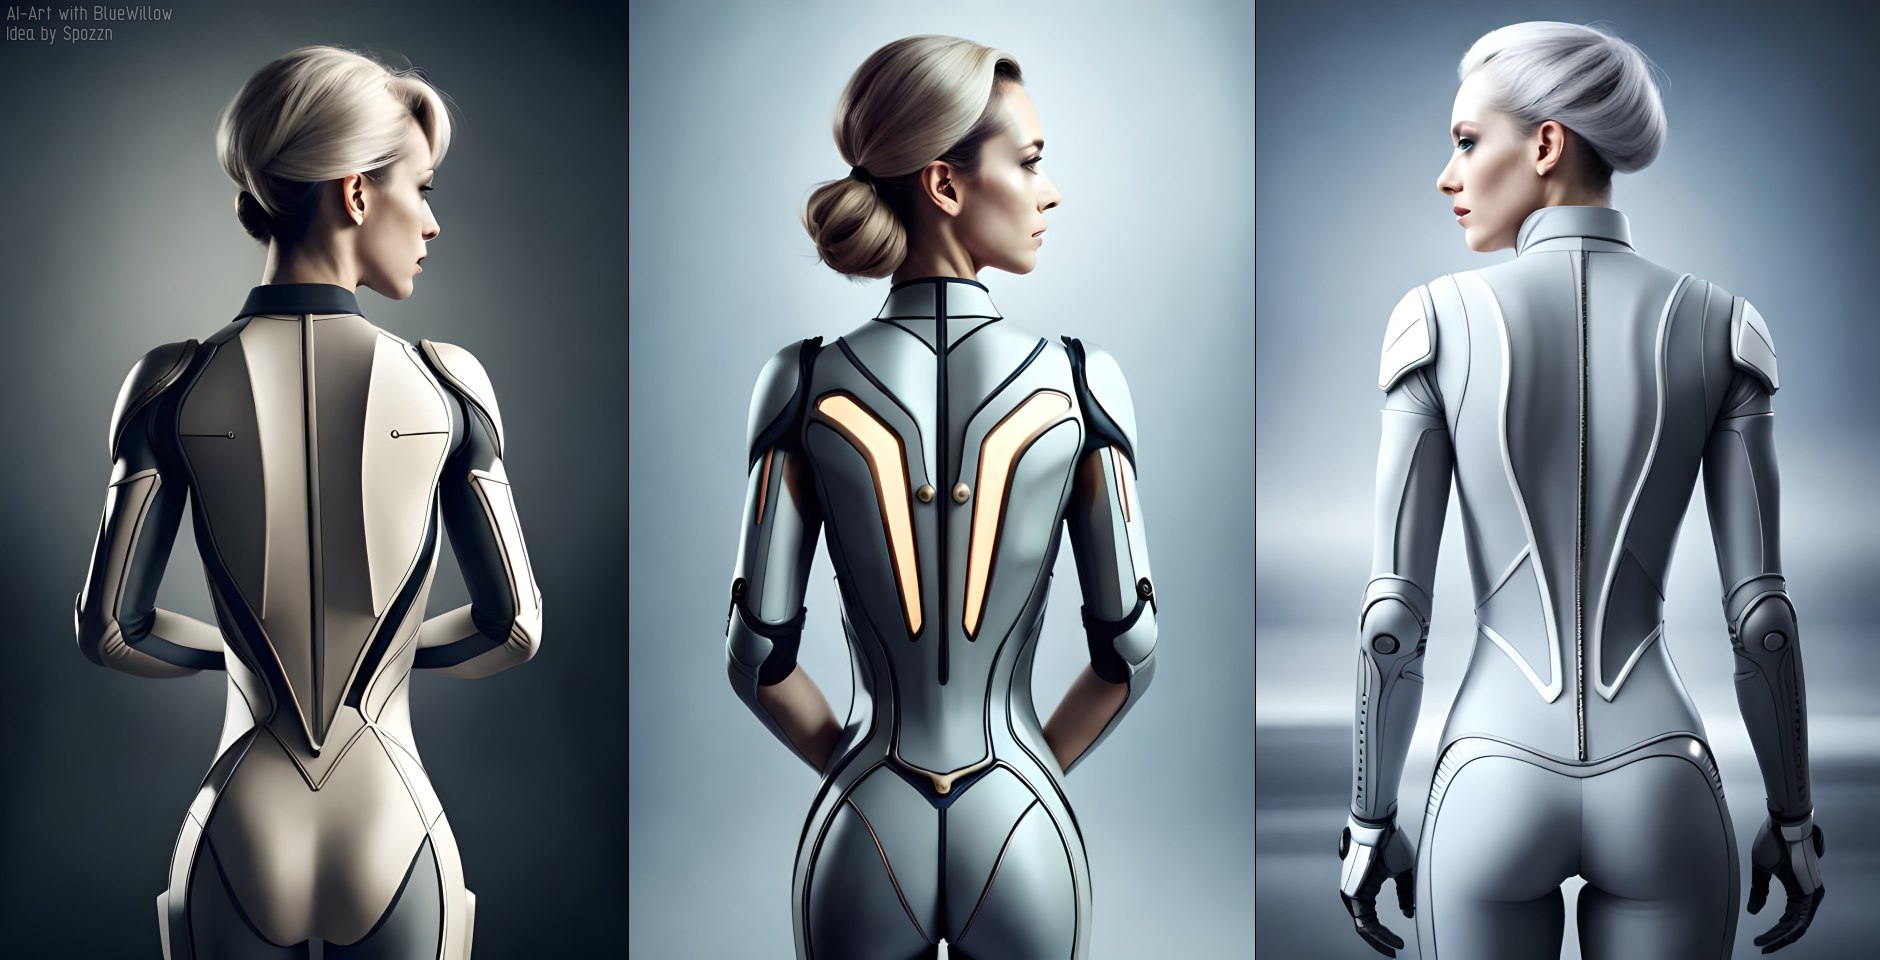 AI-Art] Futuristic female clothing with prompt by Spozzn on DeviantArt